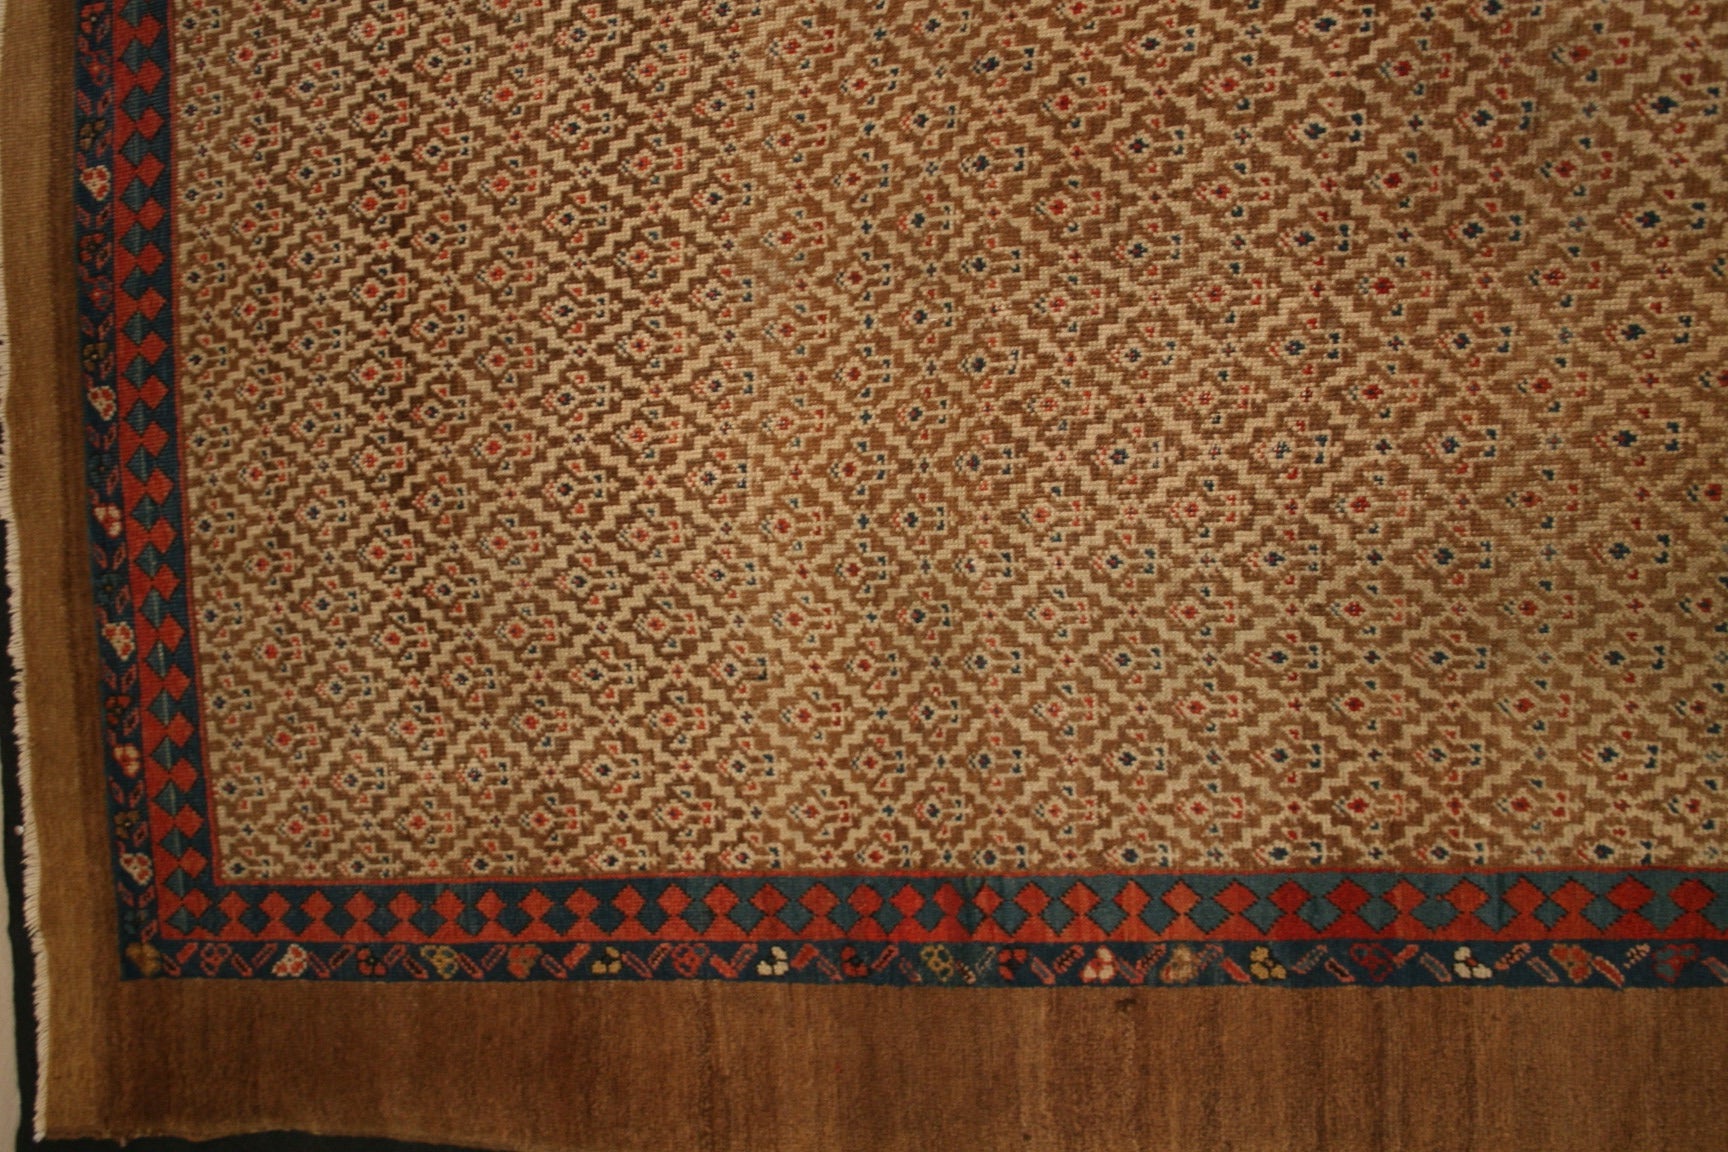 Wool Very Rare Antique Camel Hair Sarab with Lattice Design Field For Sale